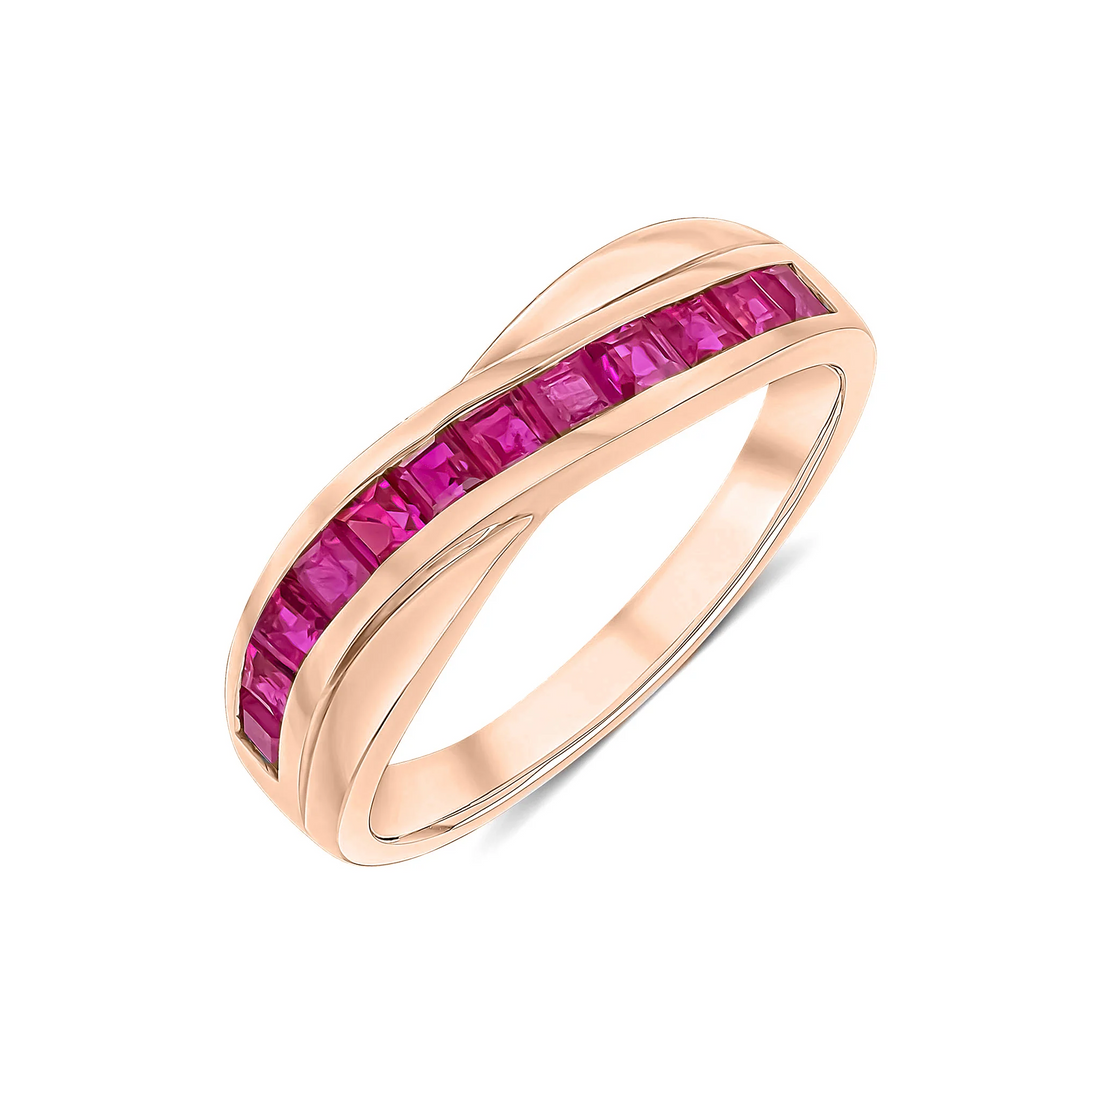 9CT Gold Square Channel Set Ruby Twist Half Eternity Ring